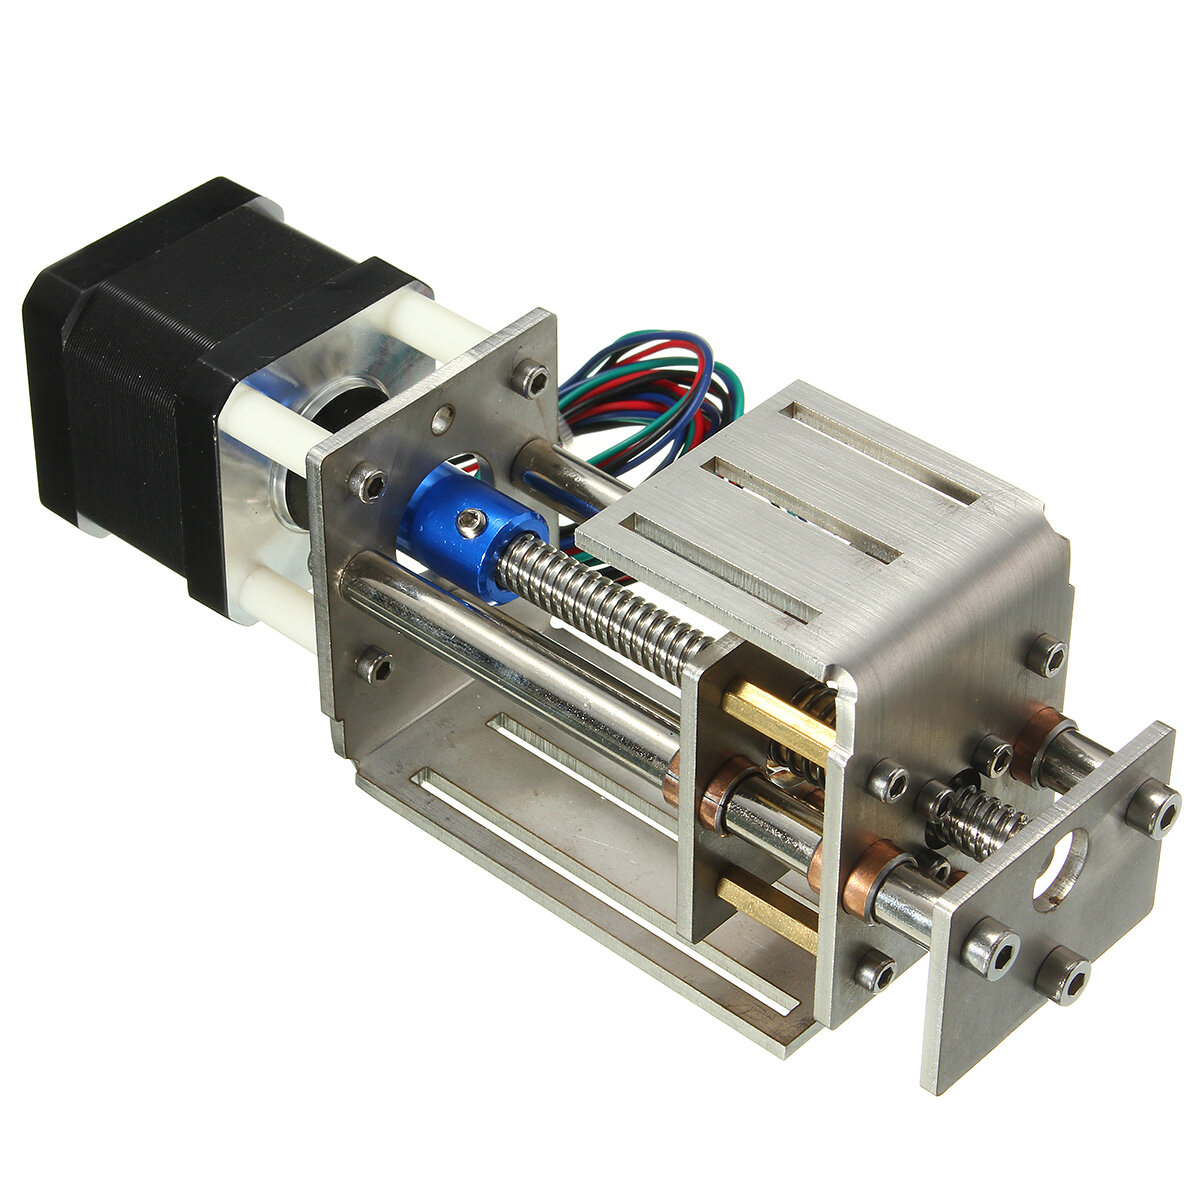 

Z Axis Slide 3 Axis 60MM DIY Milling Linear Motion CNC Engraving Machine CNC Linear Actuator